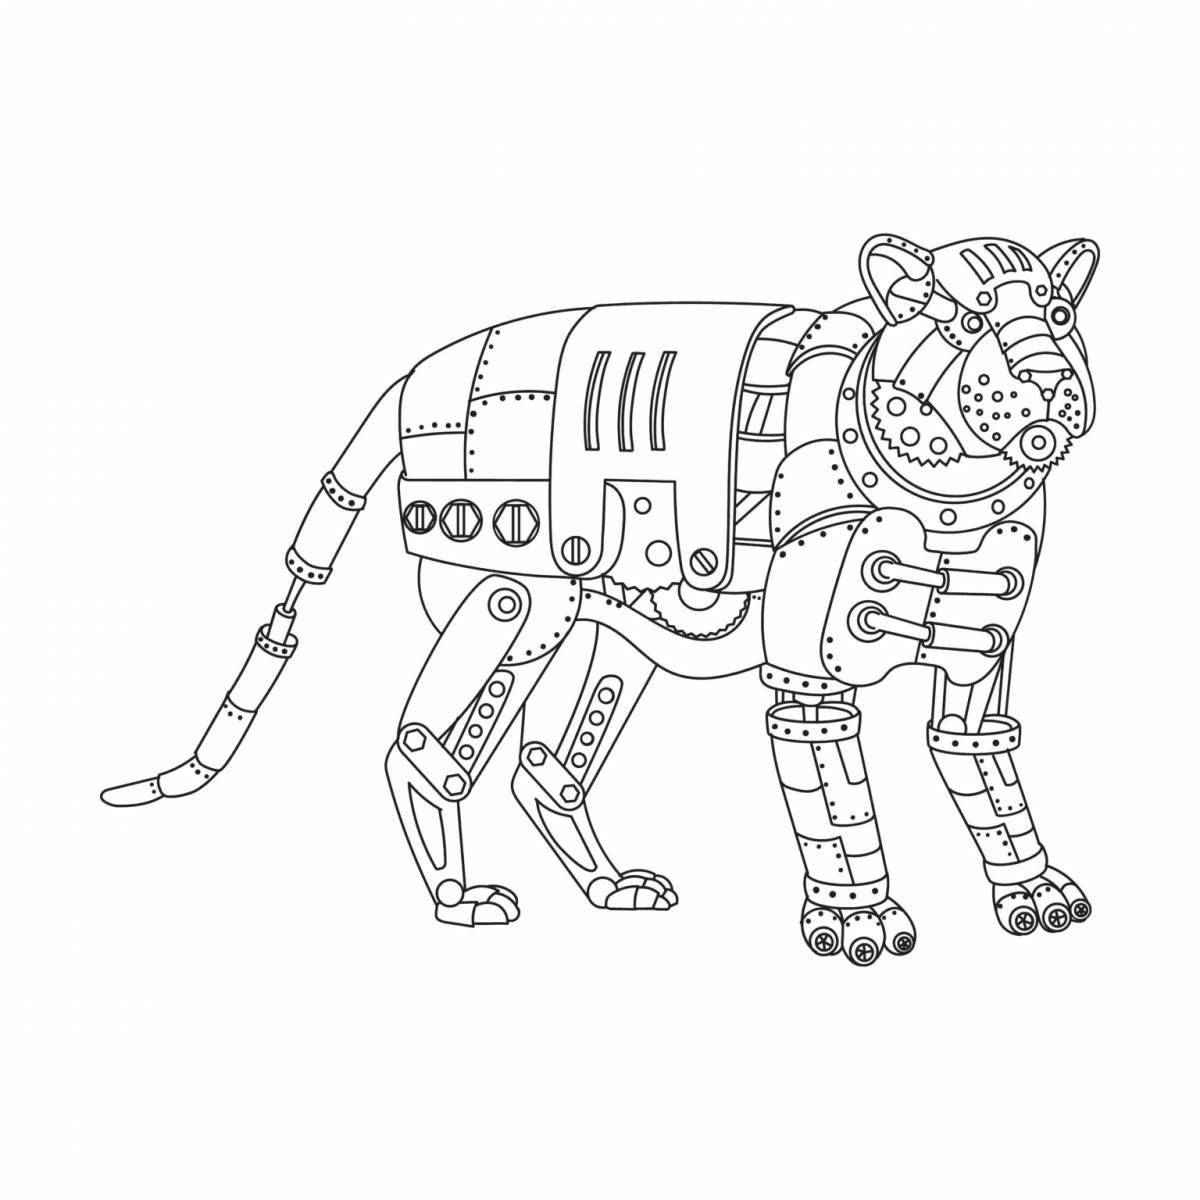 Adorable robot cat coloring page